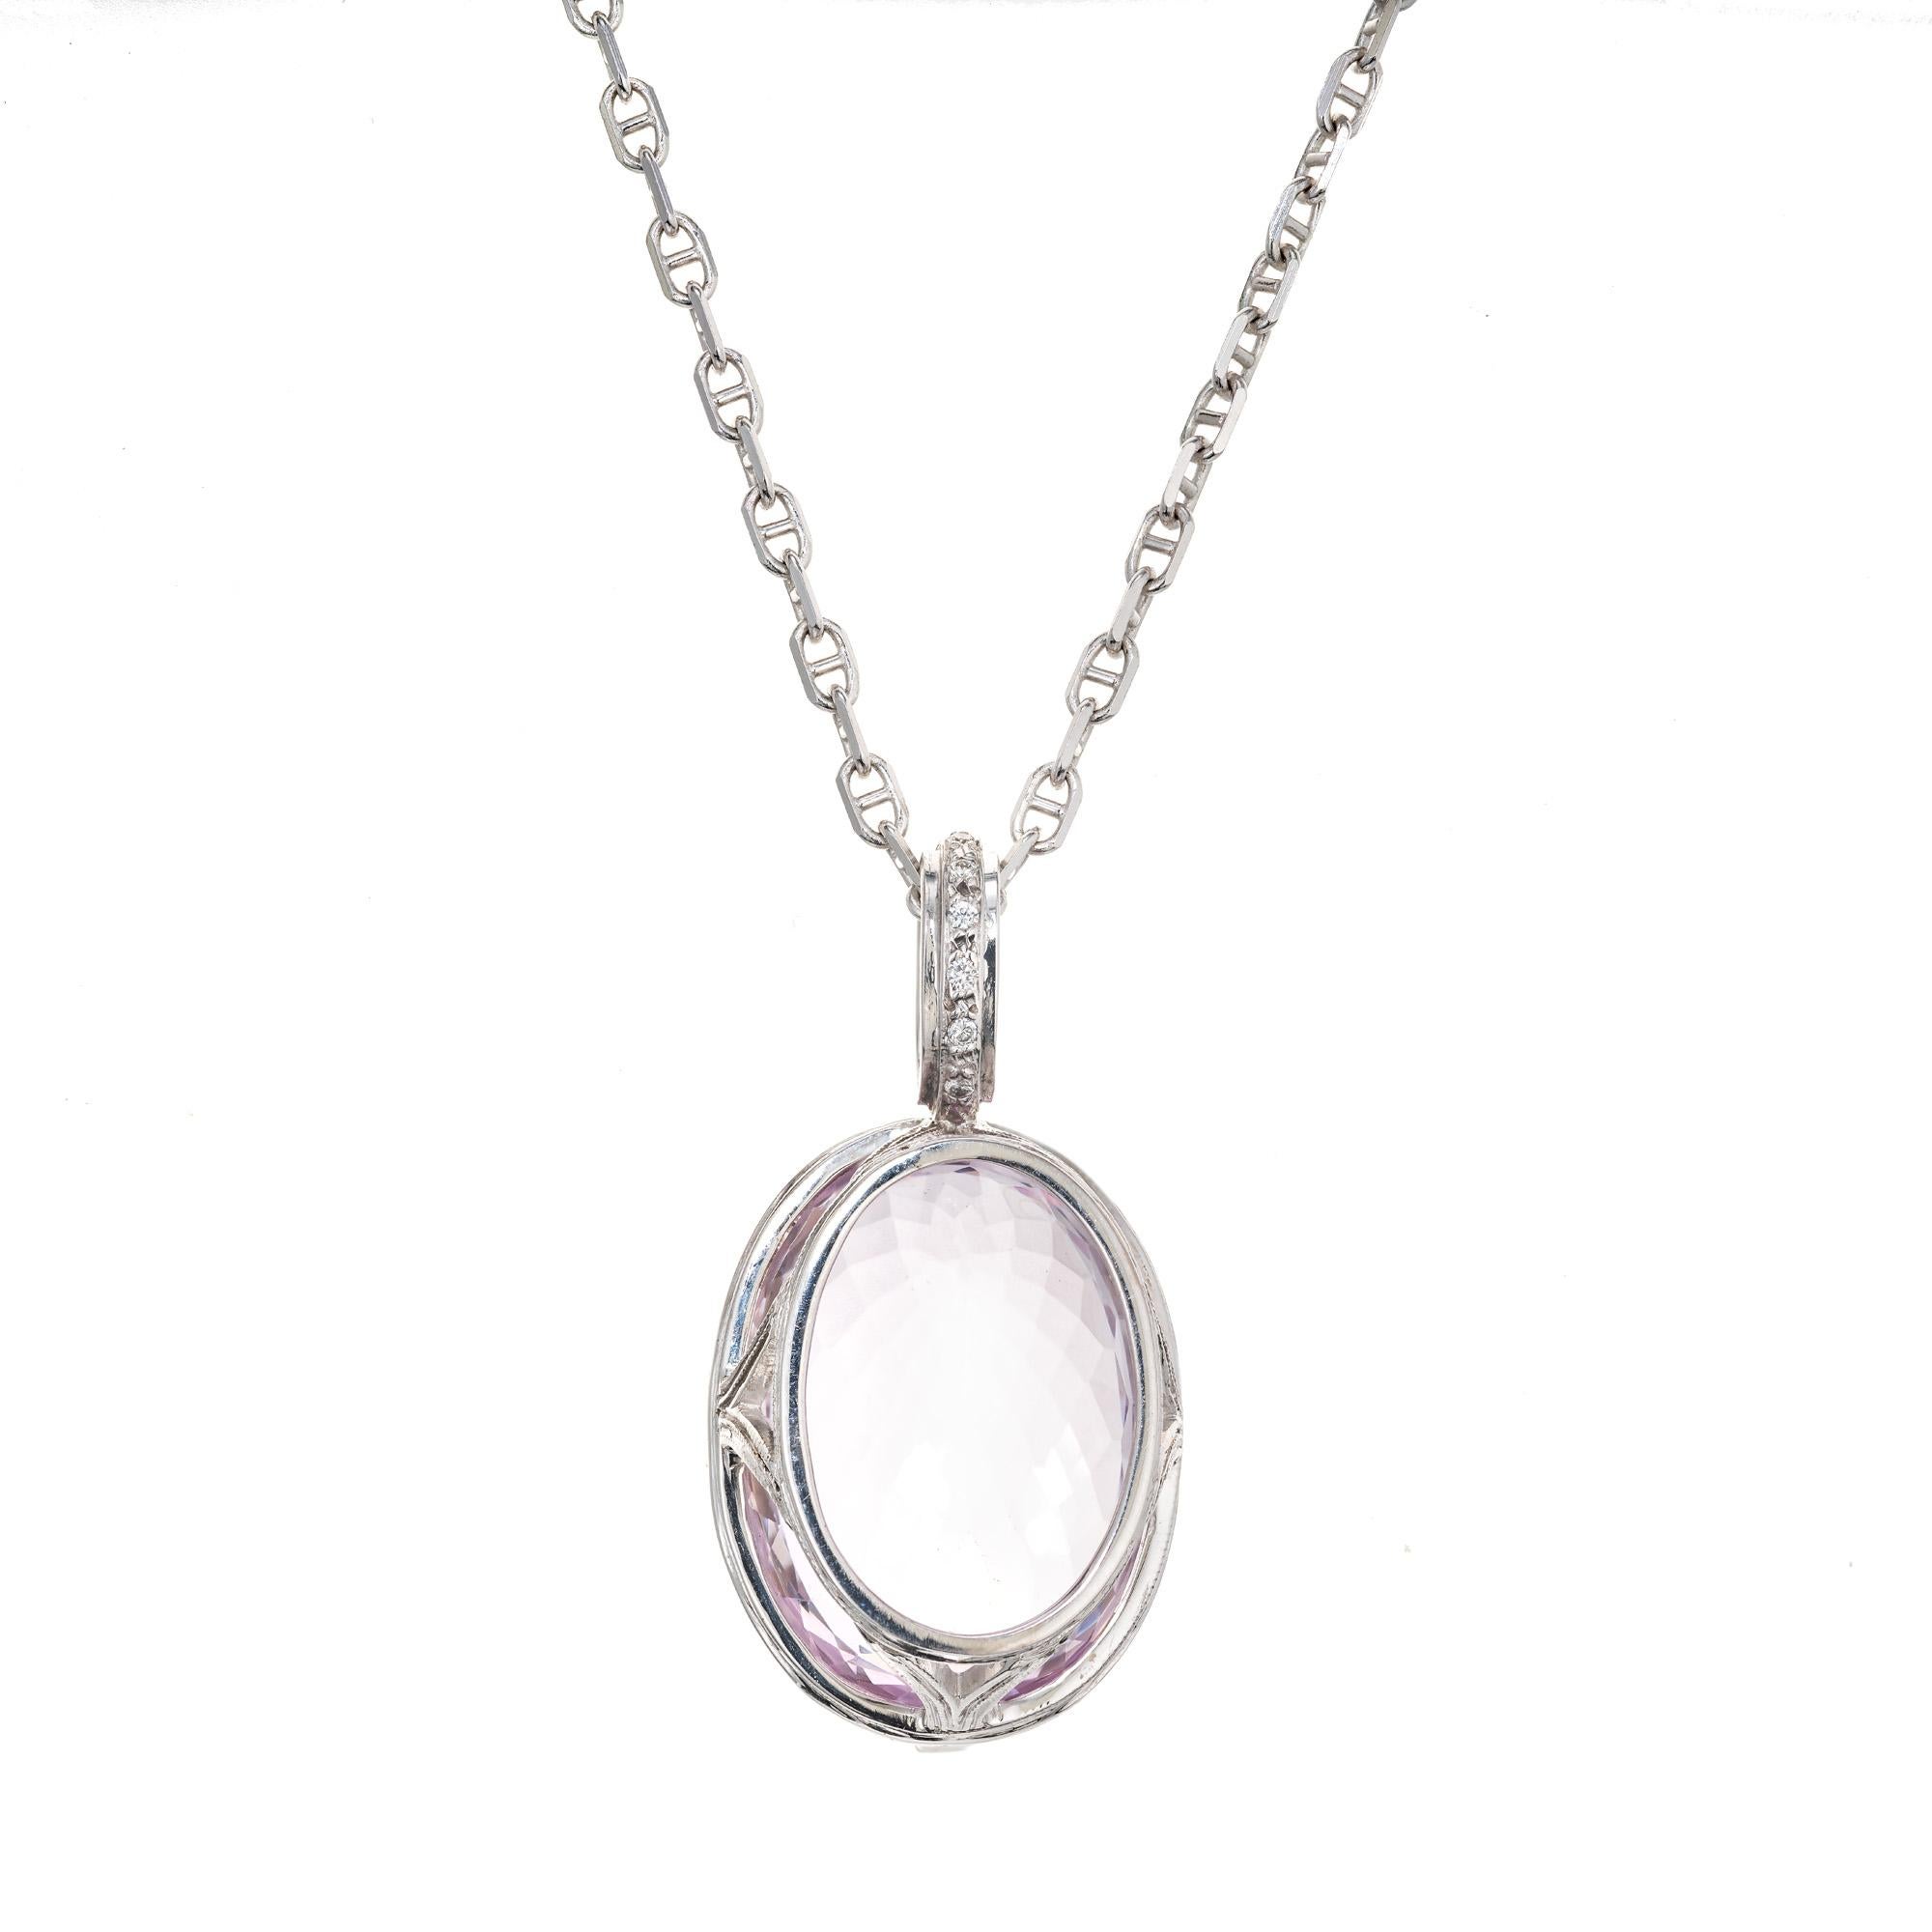 21.69 Carat Pink Oval Kunzite Diamond White Gold Pendant Necklace In Good Condition For Sale In Stamford, CT